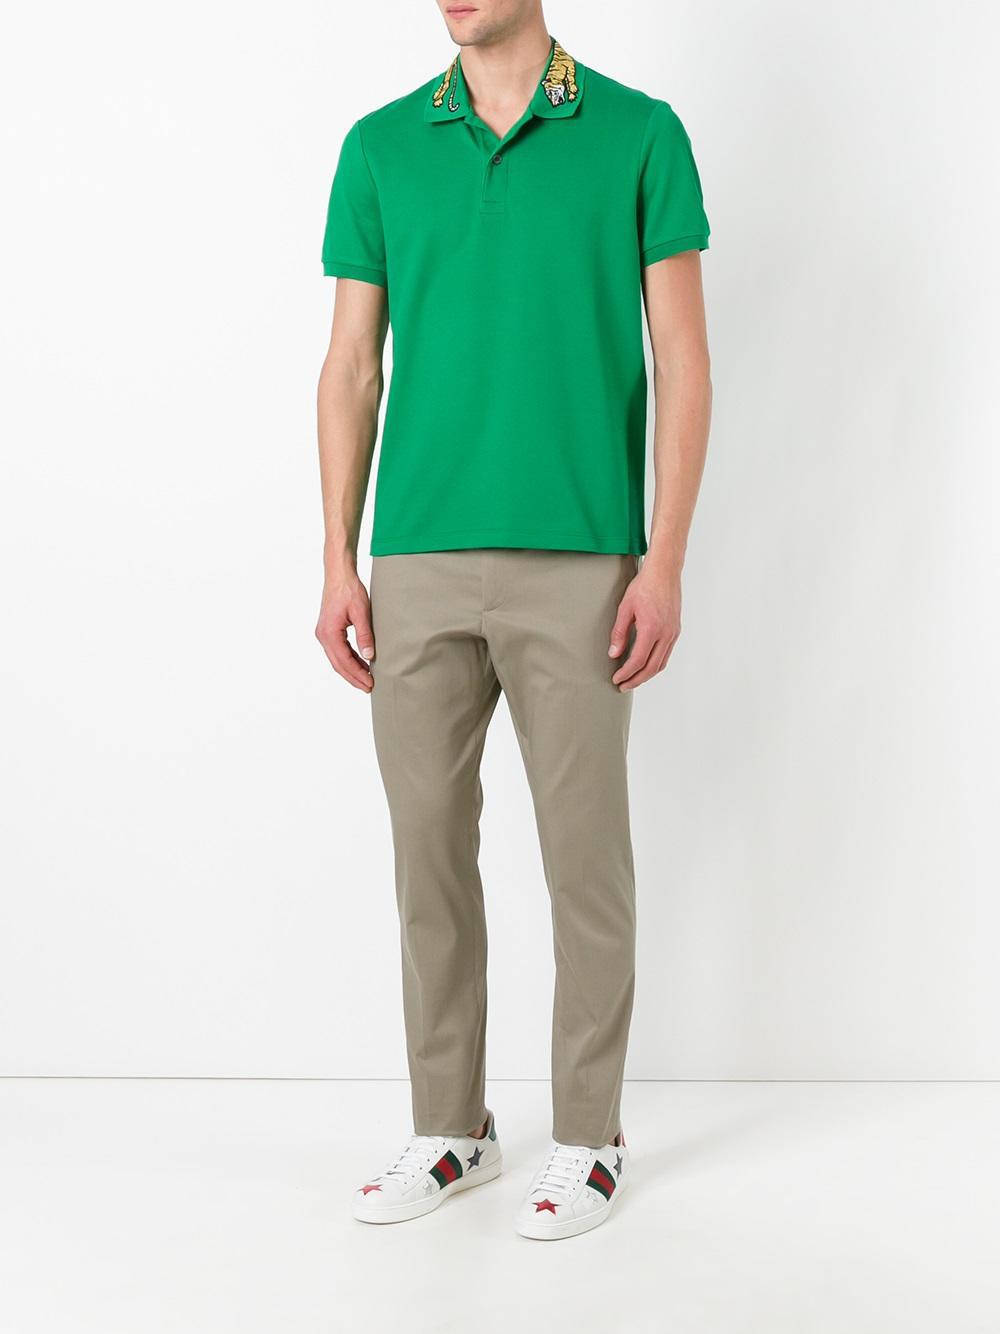 Gucci Cotton Tiger Embroidered Polo Shirt in Green for Men - Lyst